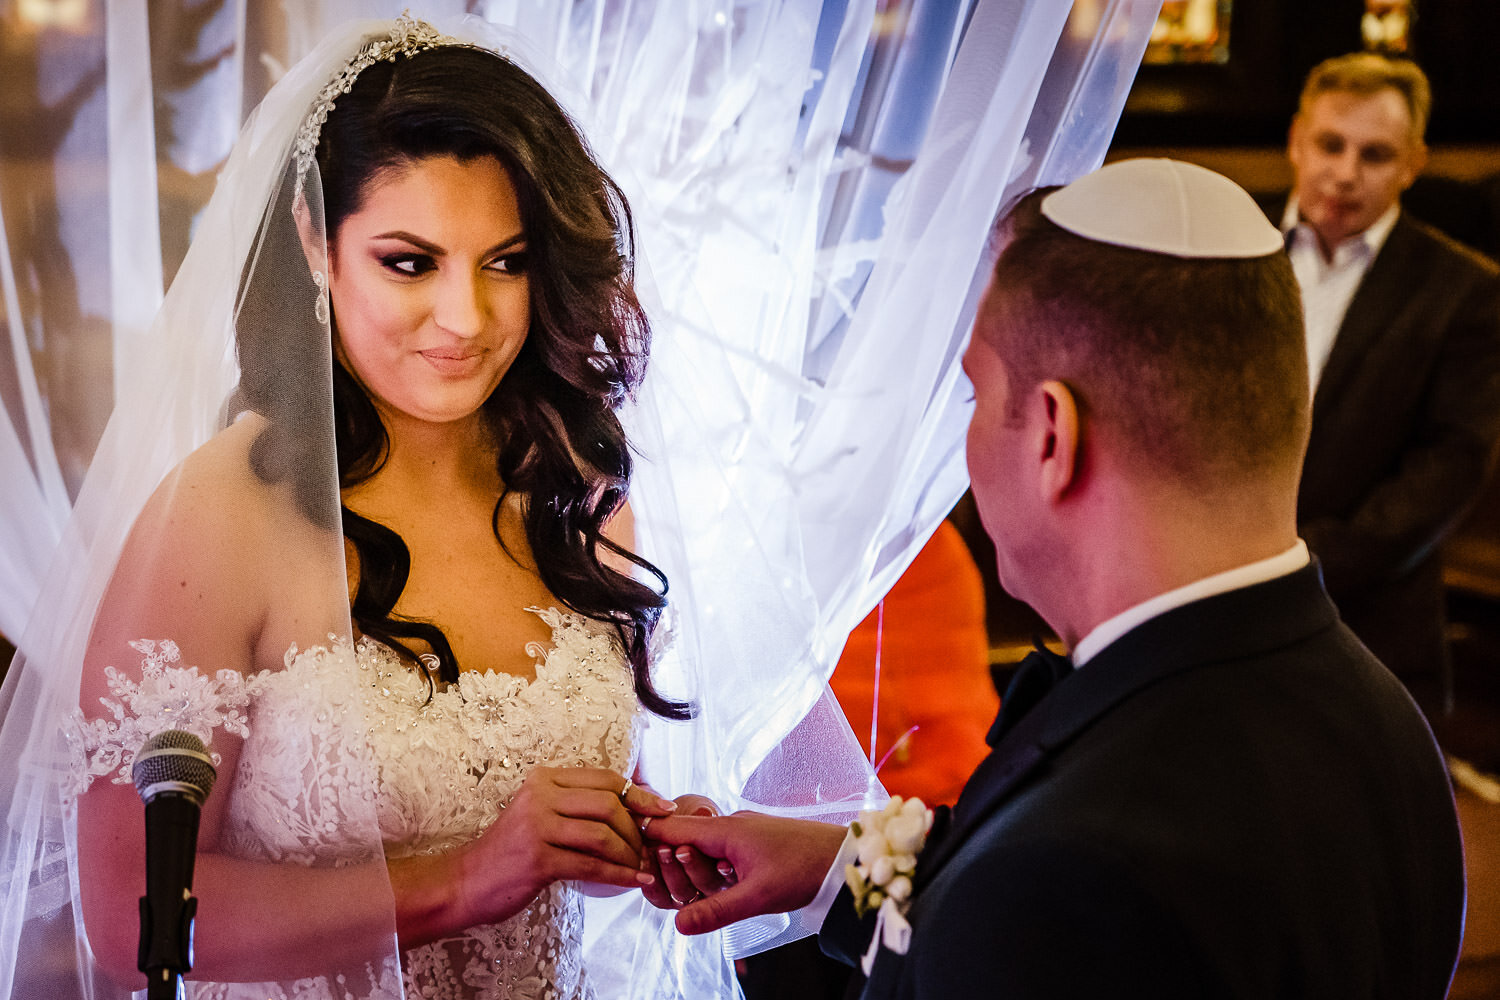 Bride and Groom exchange rings during ceremony at Park Slope Jewish center